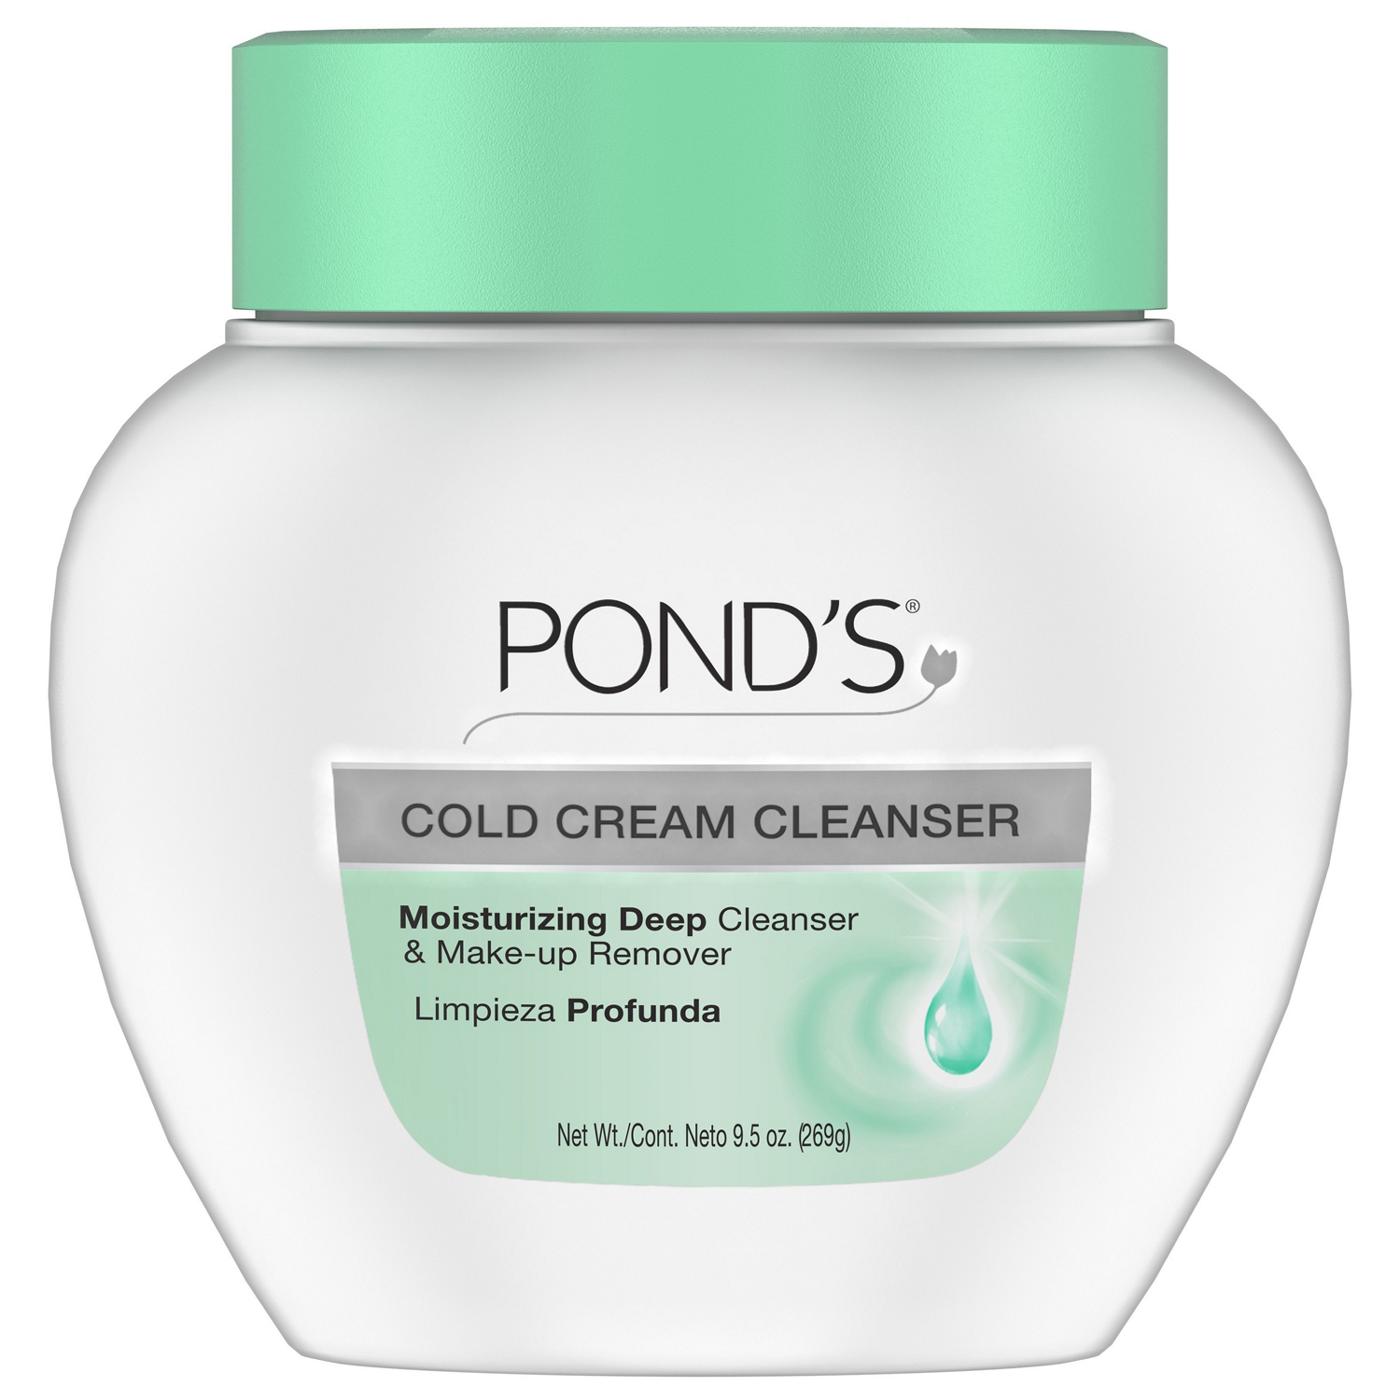 Pond's Cold Cream Cleanser; image 1 of 3